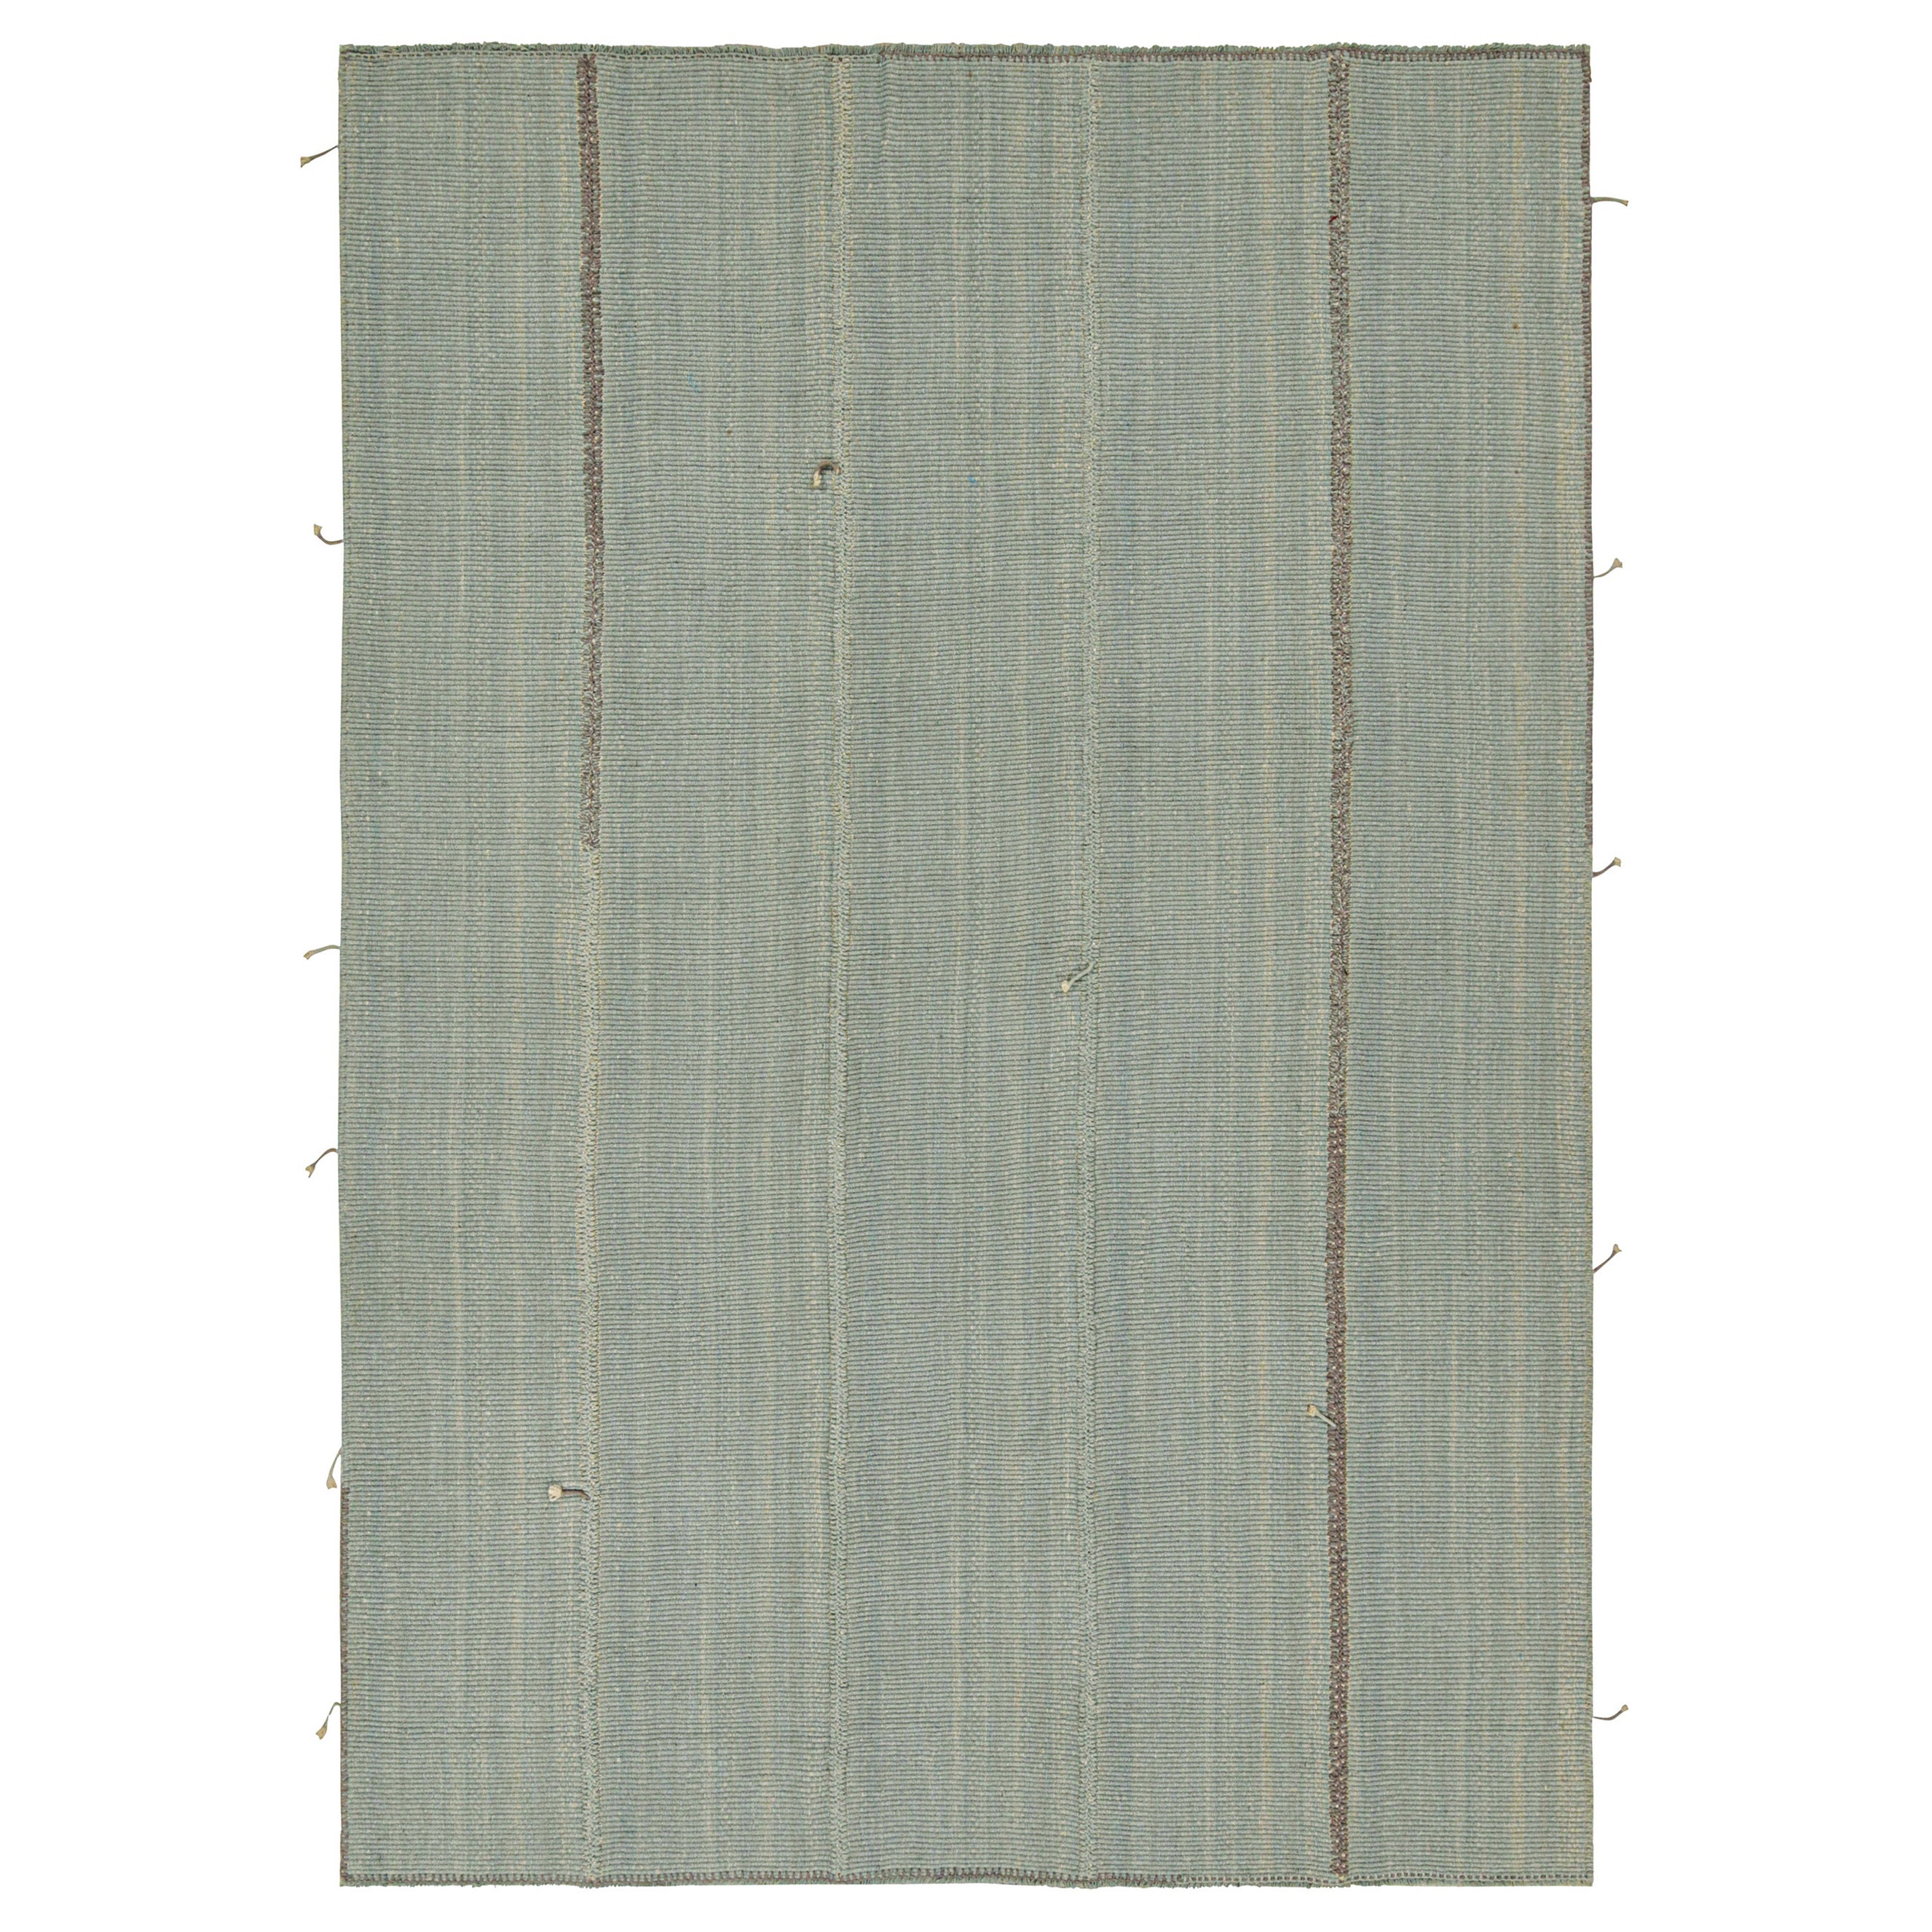 Rug & Kilim’s Contemporary Kilim Rug in Blue with Gray Stripes and Brown Accents